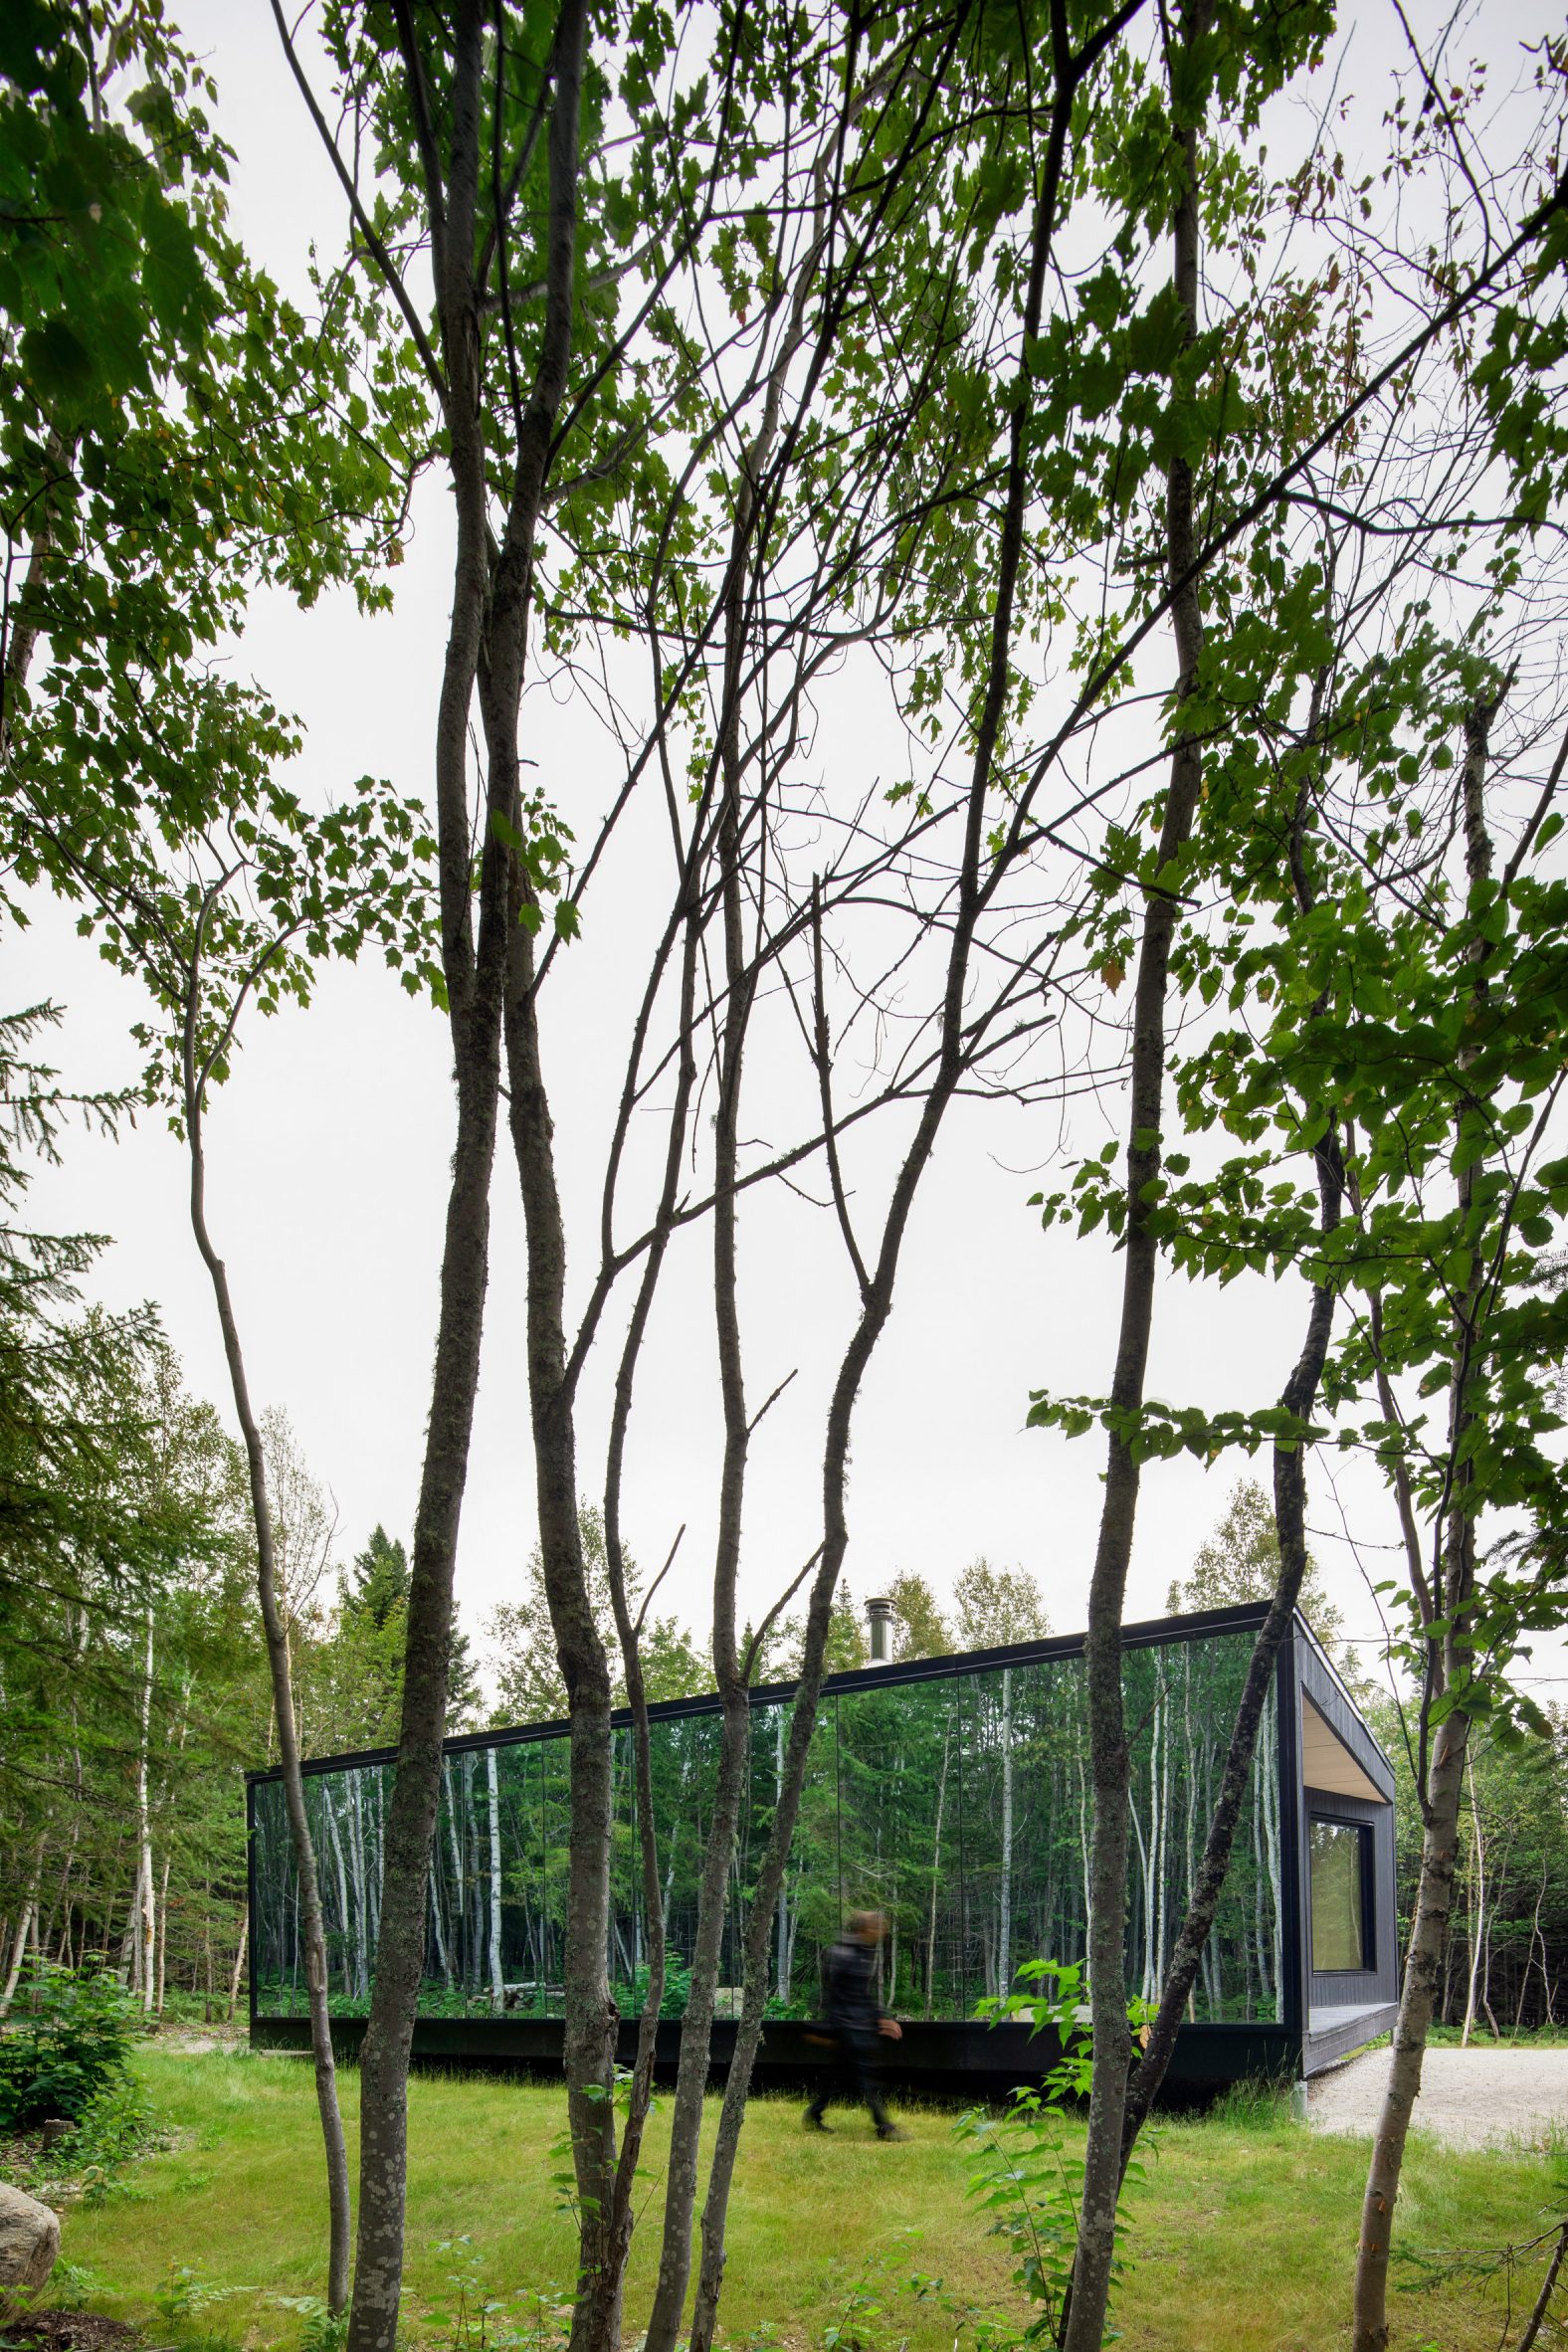 Forest glamp has a reflective glass wall